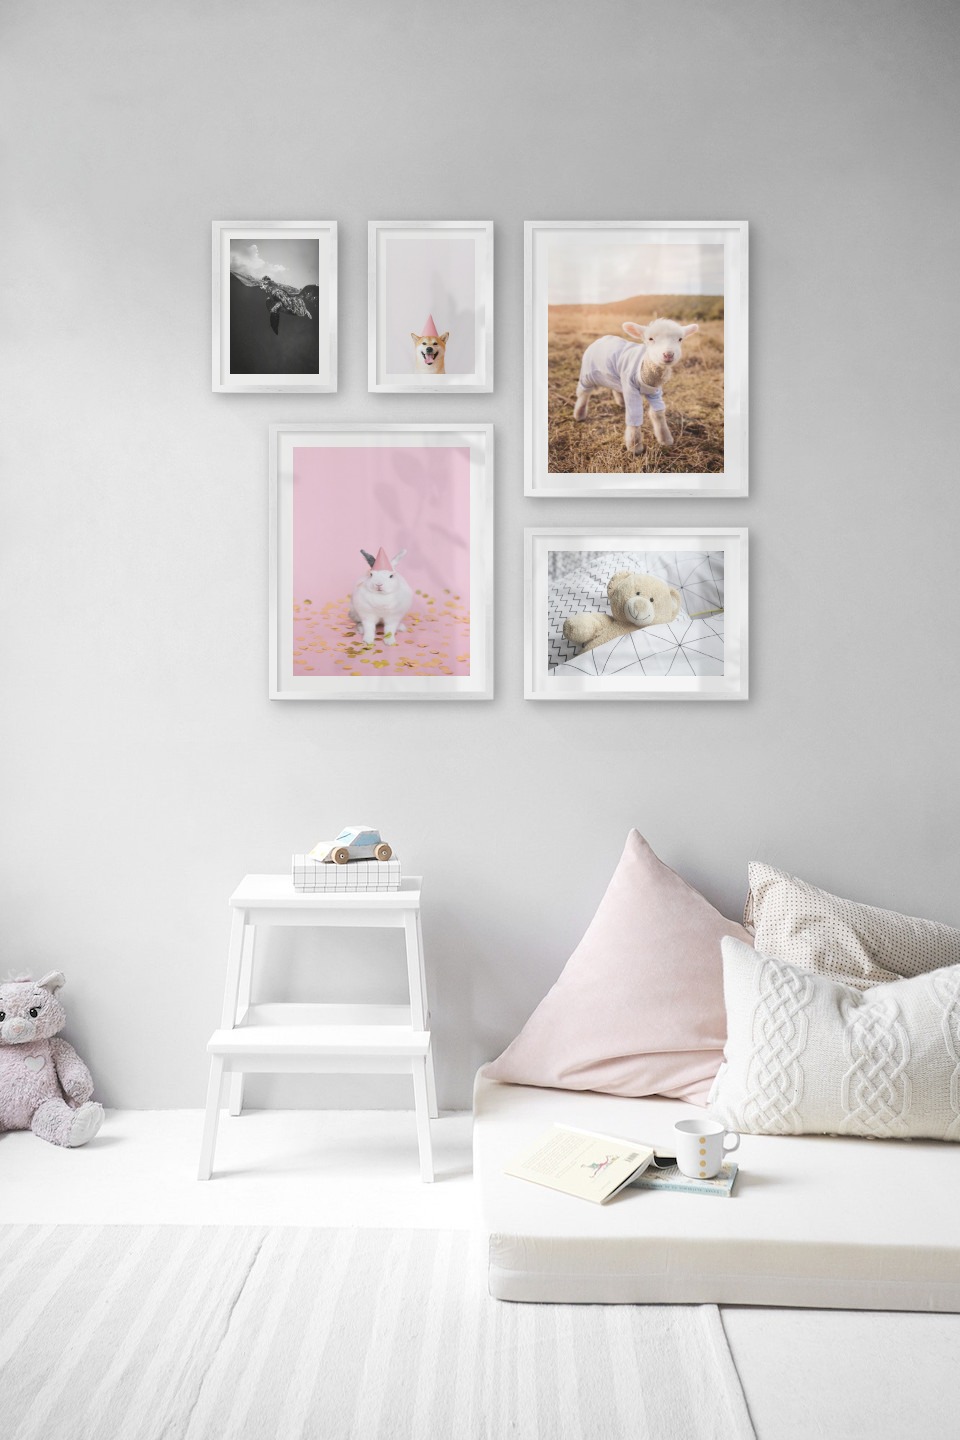 Gallery wall with picture frames in silver in sizes 21x30, 40x50 and 30x40 with prints "Dog with pink hat", "Turtle", "Rabbit with party hat", "Lamb" and "Teddy bear in bed"